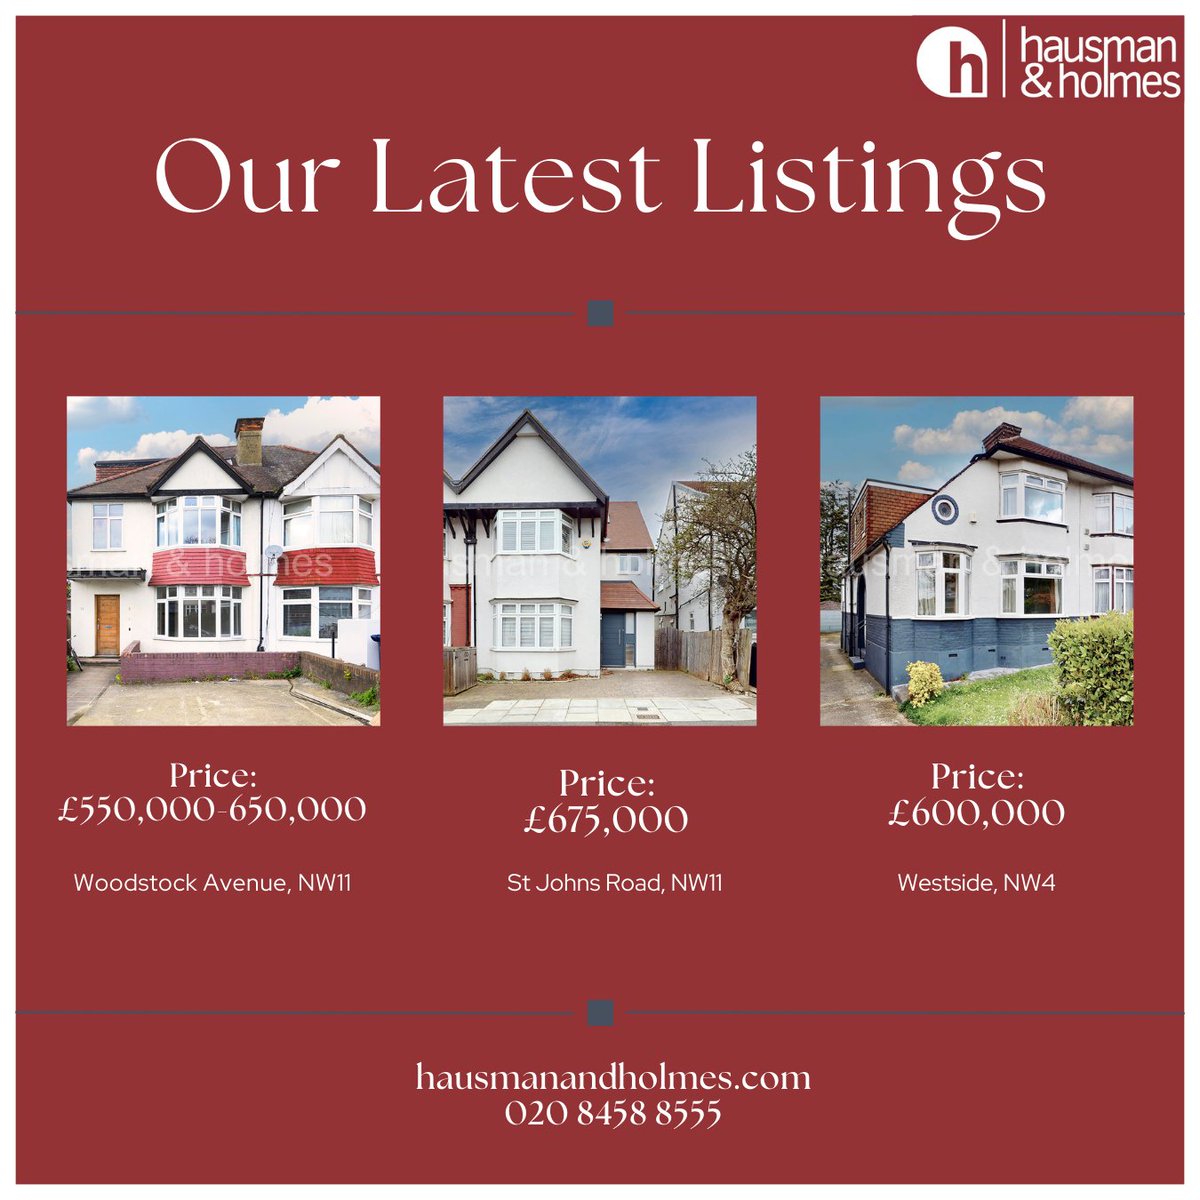 🏡 Check out our latest listings!
Don't miss out on these fantastic opportunities! Contact us today for more information and to schedule a viewing. 📞✨ #NewListings #GoldersGreen #LuxuryLiving #hausmanandholmes #property #estateagents #forsale #househunting #investmentproperty